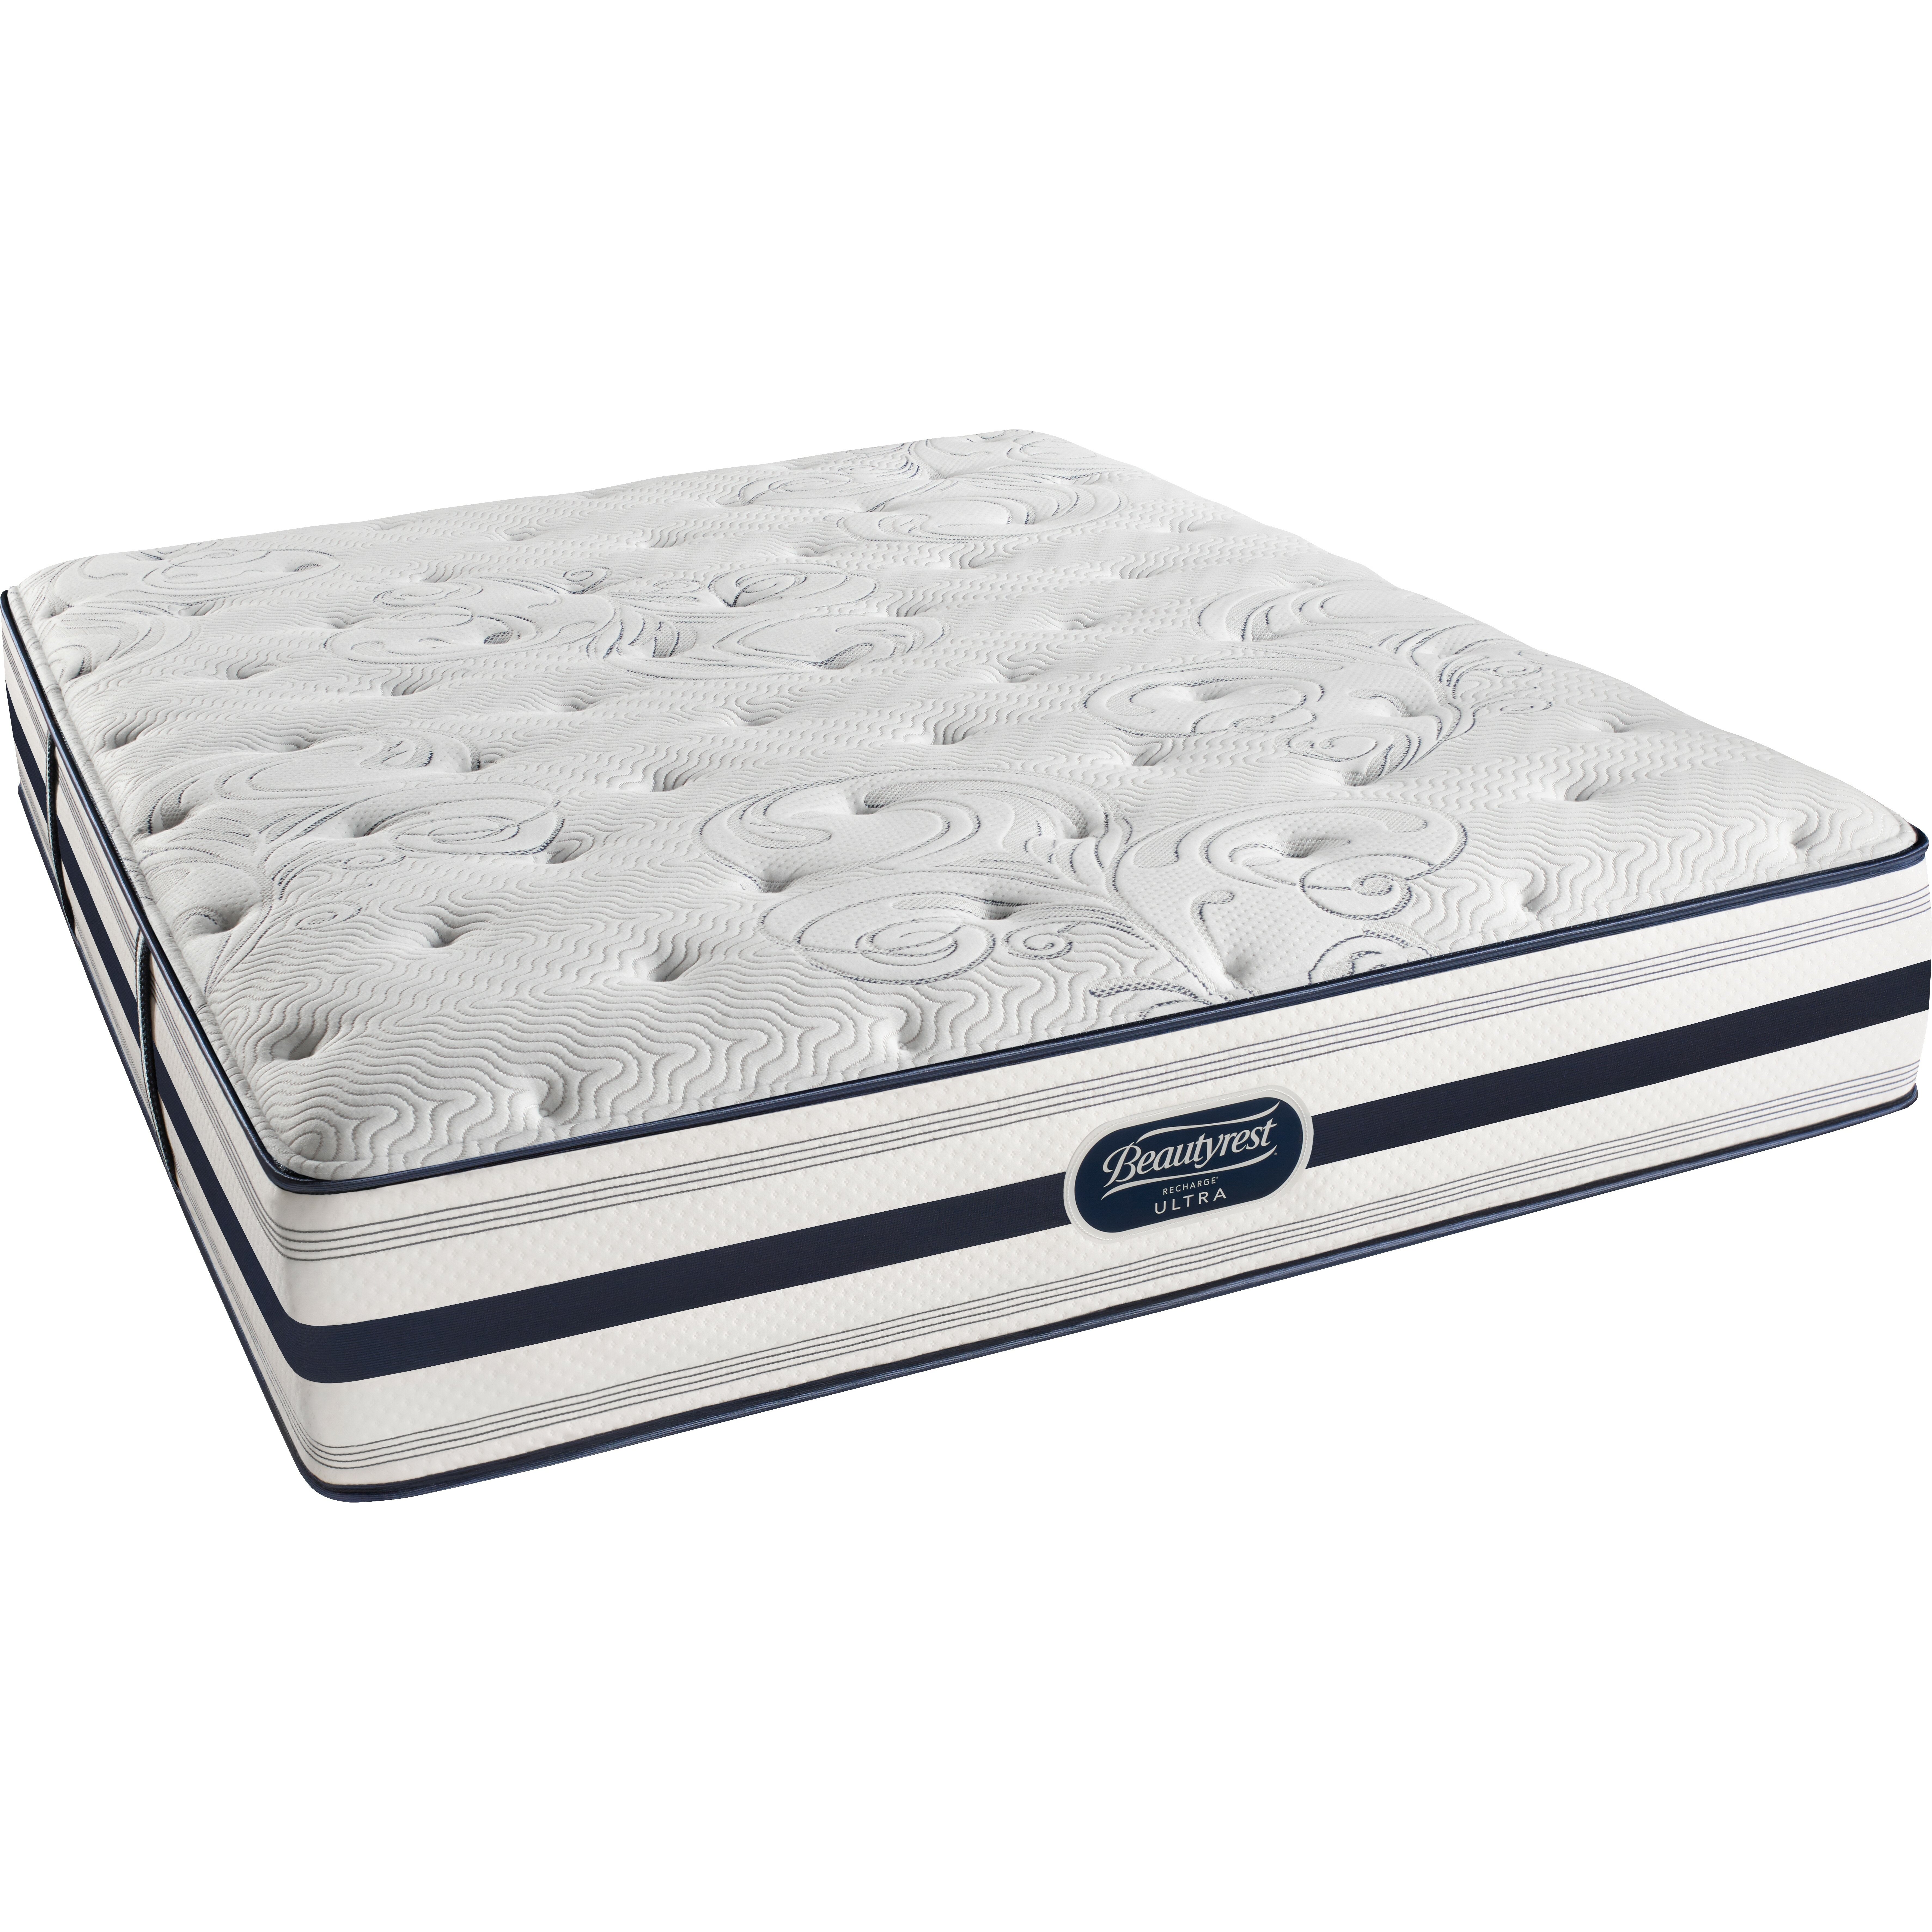 Simmons Beautyrest BeautyRest Recharge Soulmate Plush ...
